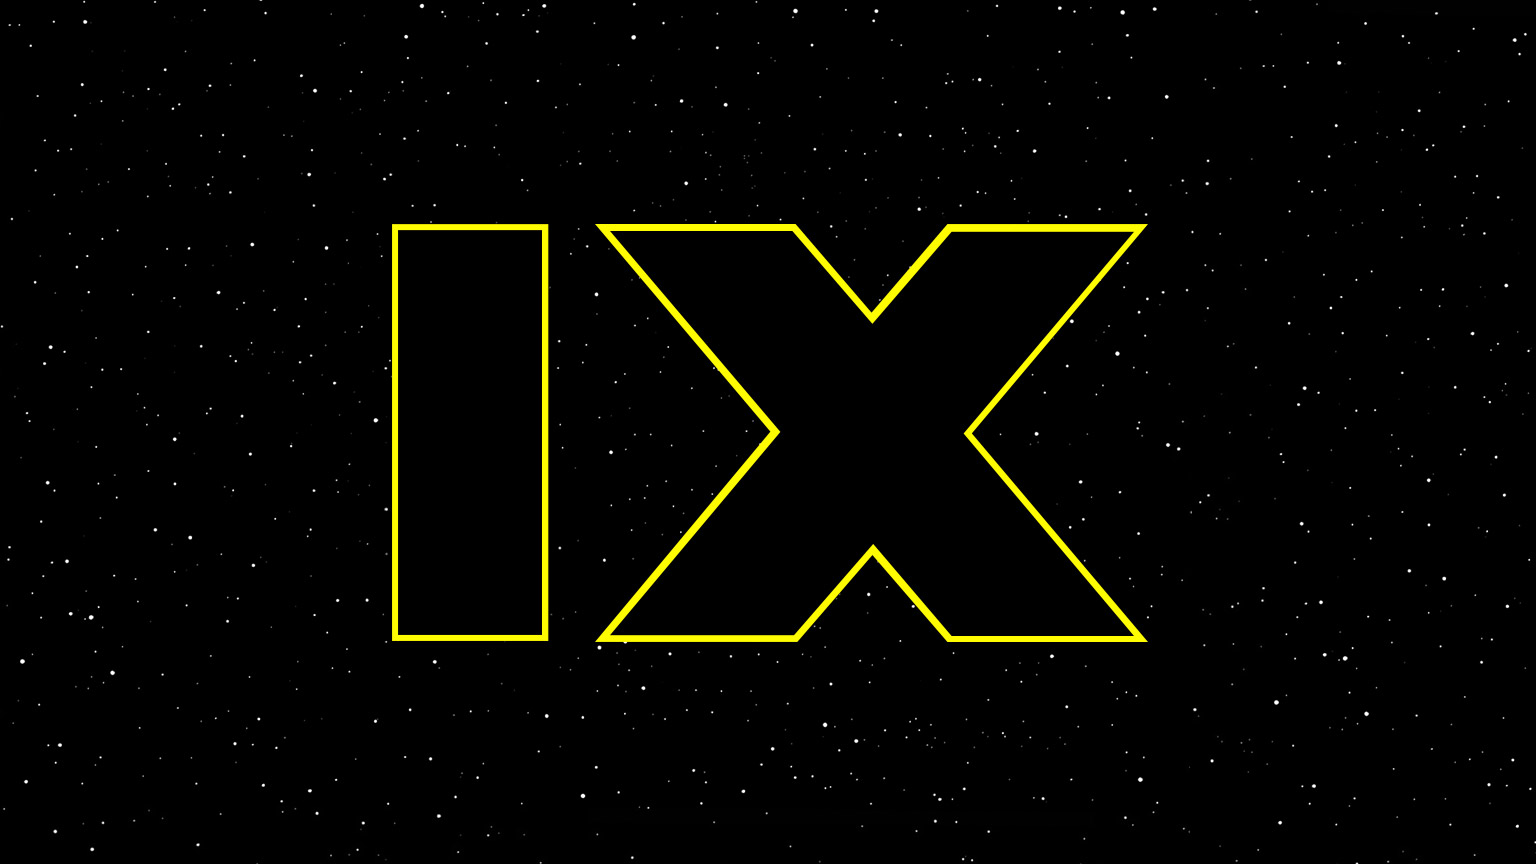 Cast Announced for Star Wars: Episode IX as Production Begins August 1